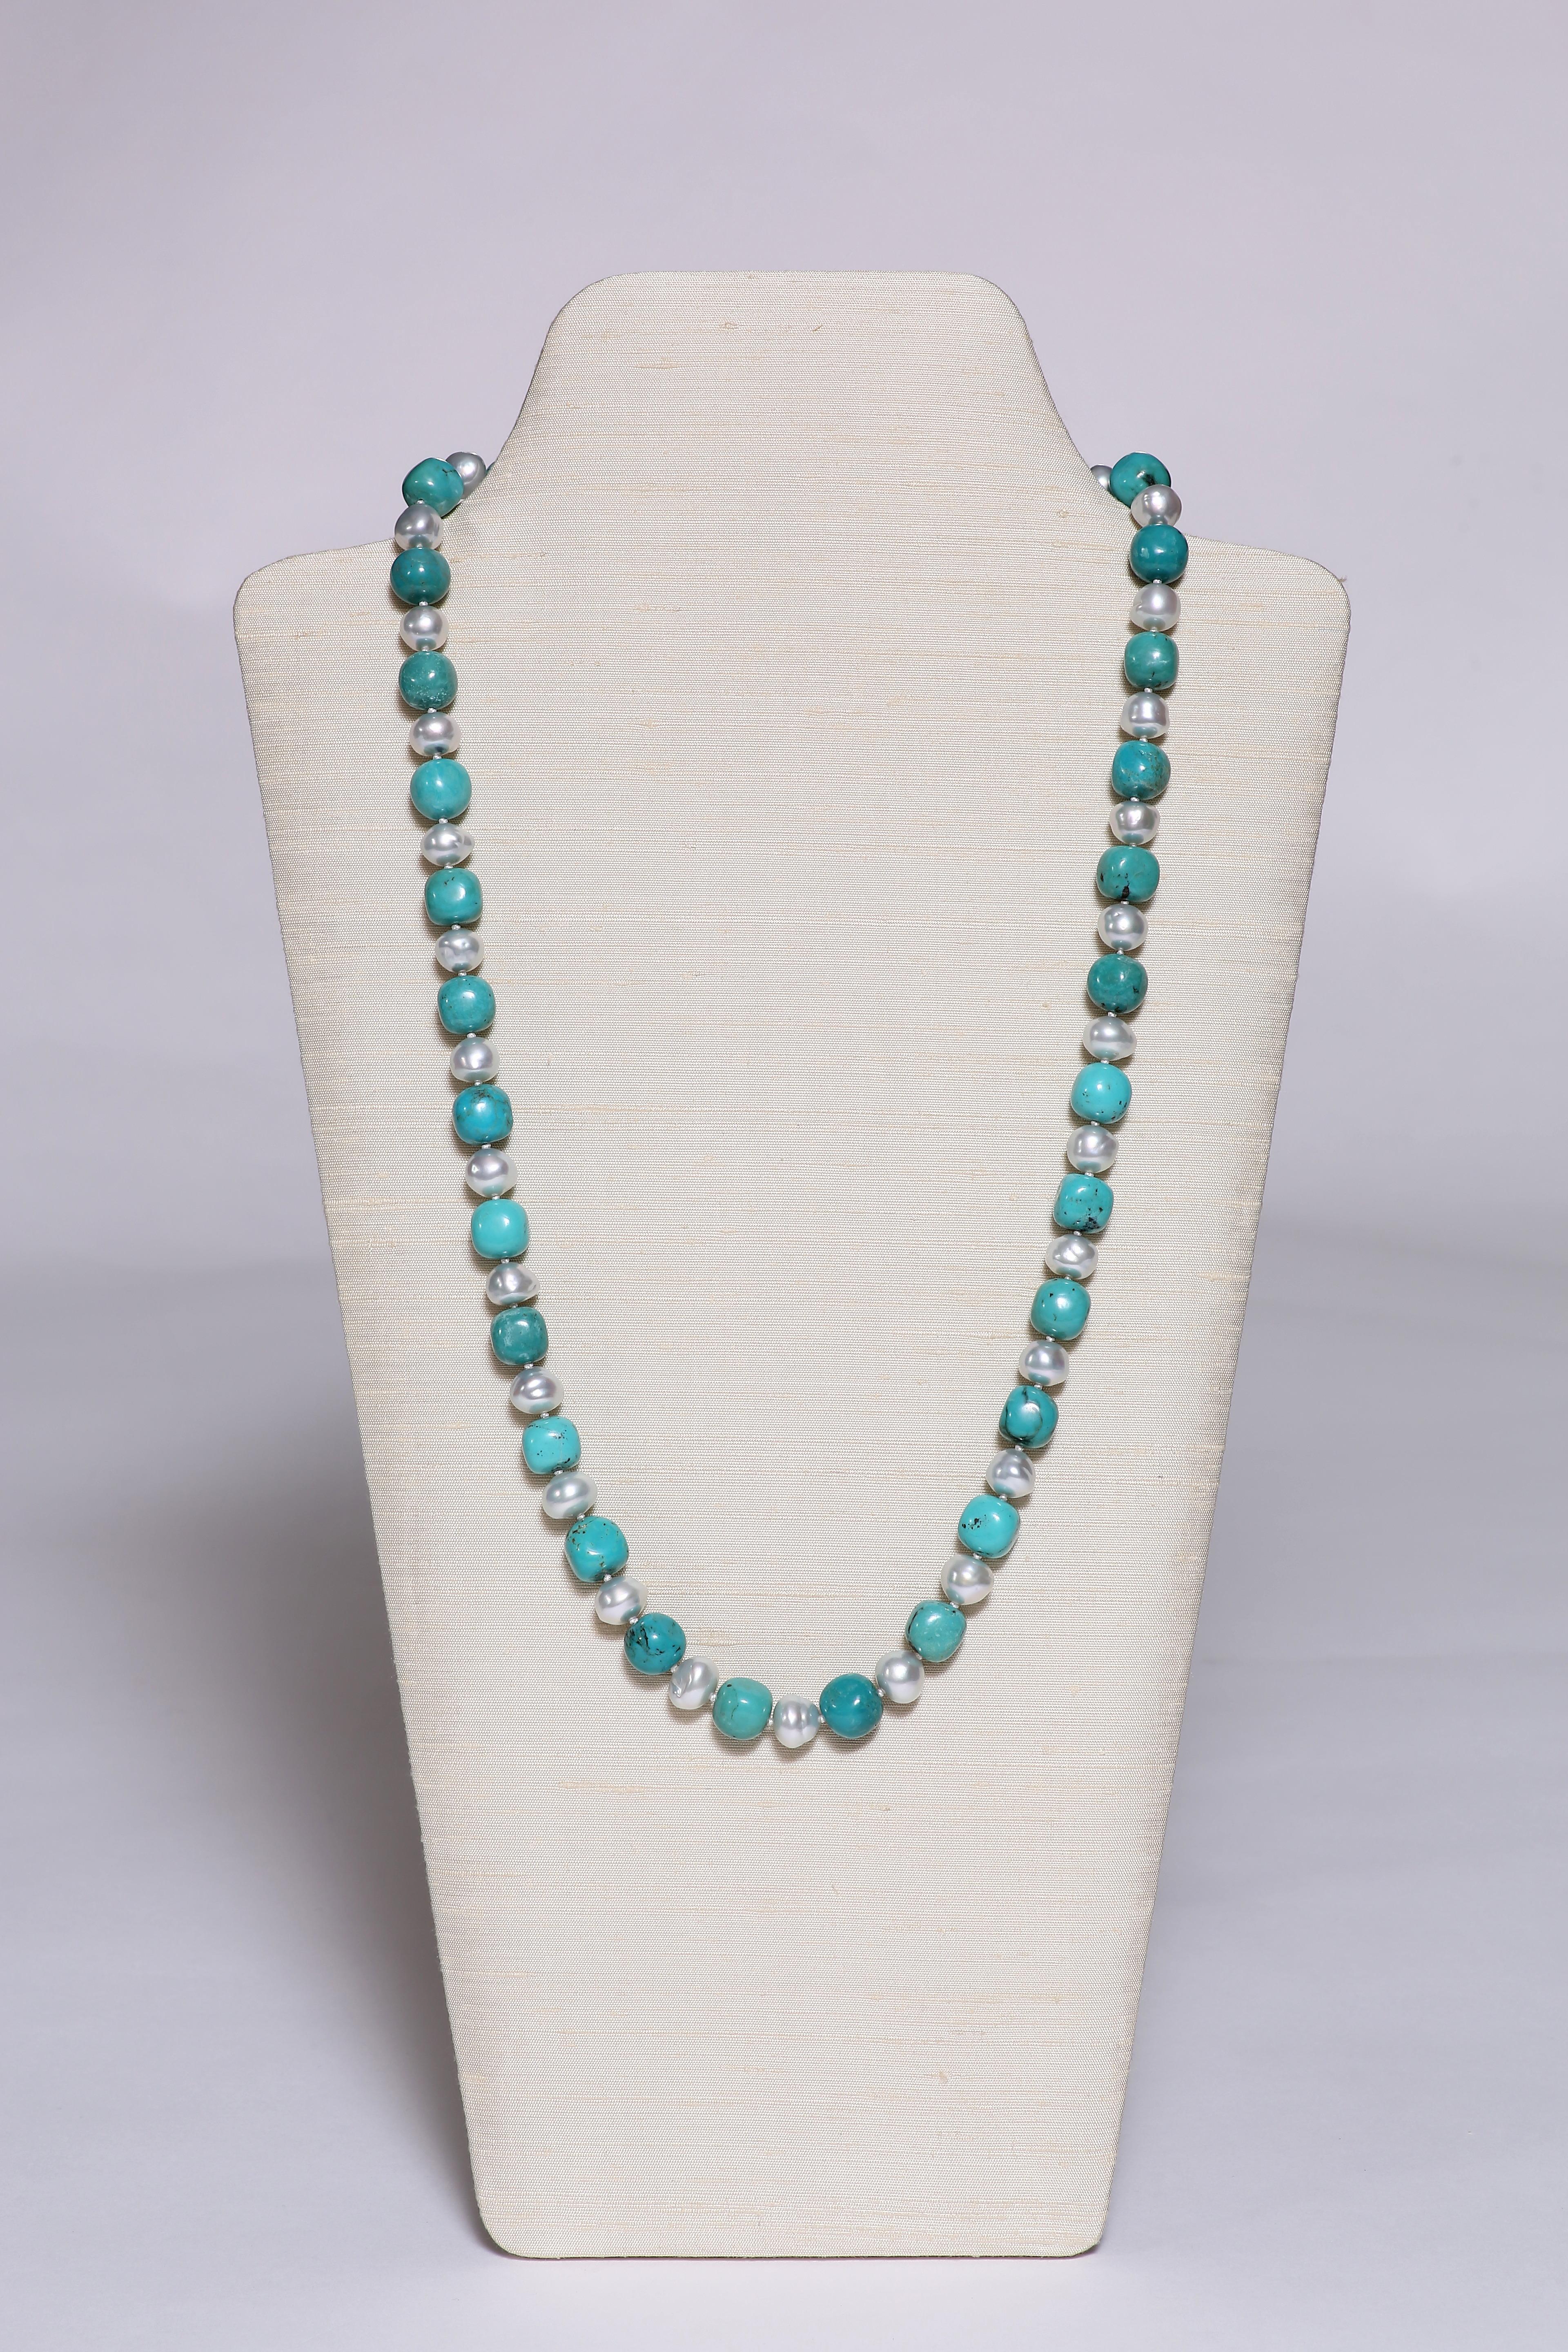 A classical necklace of fine round-shaped turquoise beads spaced by South Sea pearls, forming a 28 3/4